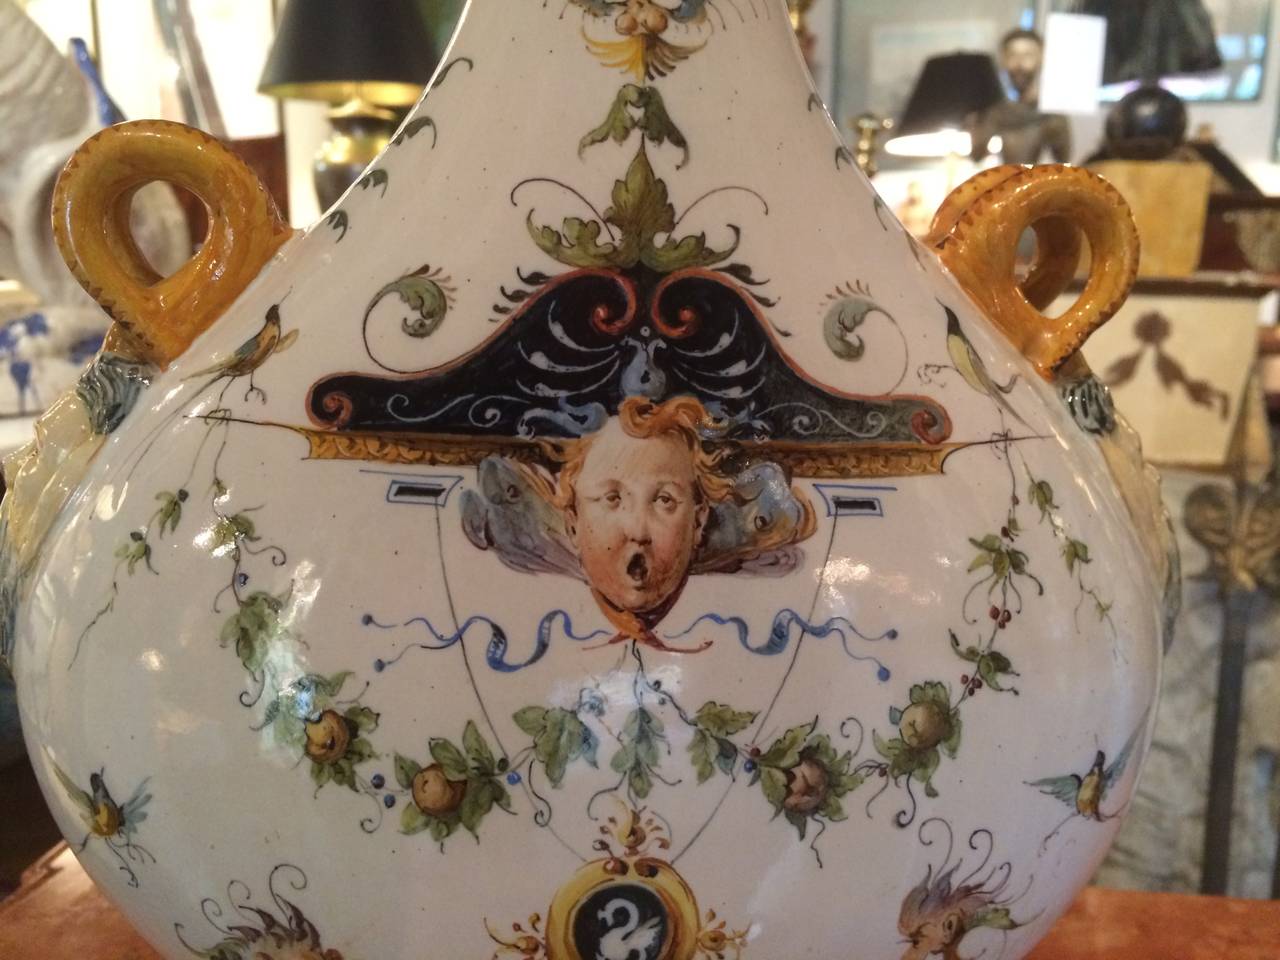 A very fine pair of Ginori Renaissance Revival glazed ceramic Maiolica pilgrim flasks now fitted as lamps with the original ceramic finials. Hand-painted throughout with amusing and exquisite Rapahelesque decoration typical of Ginori. Signed on